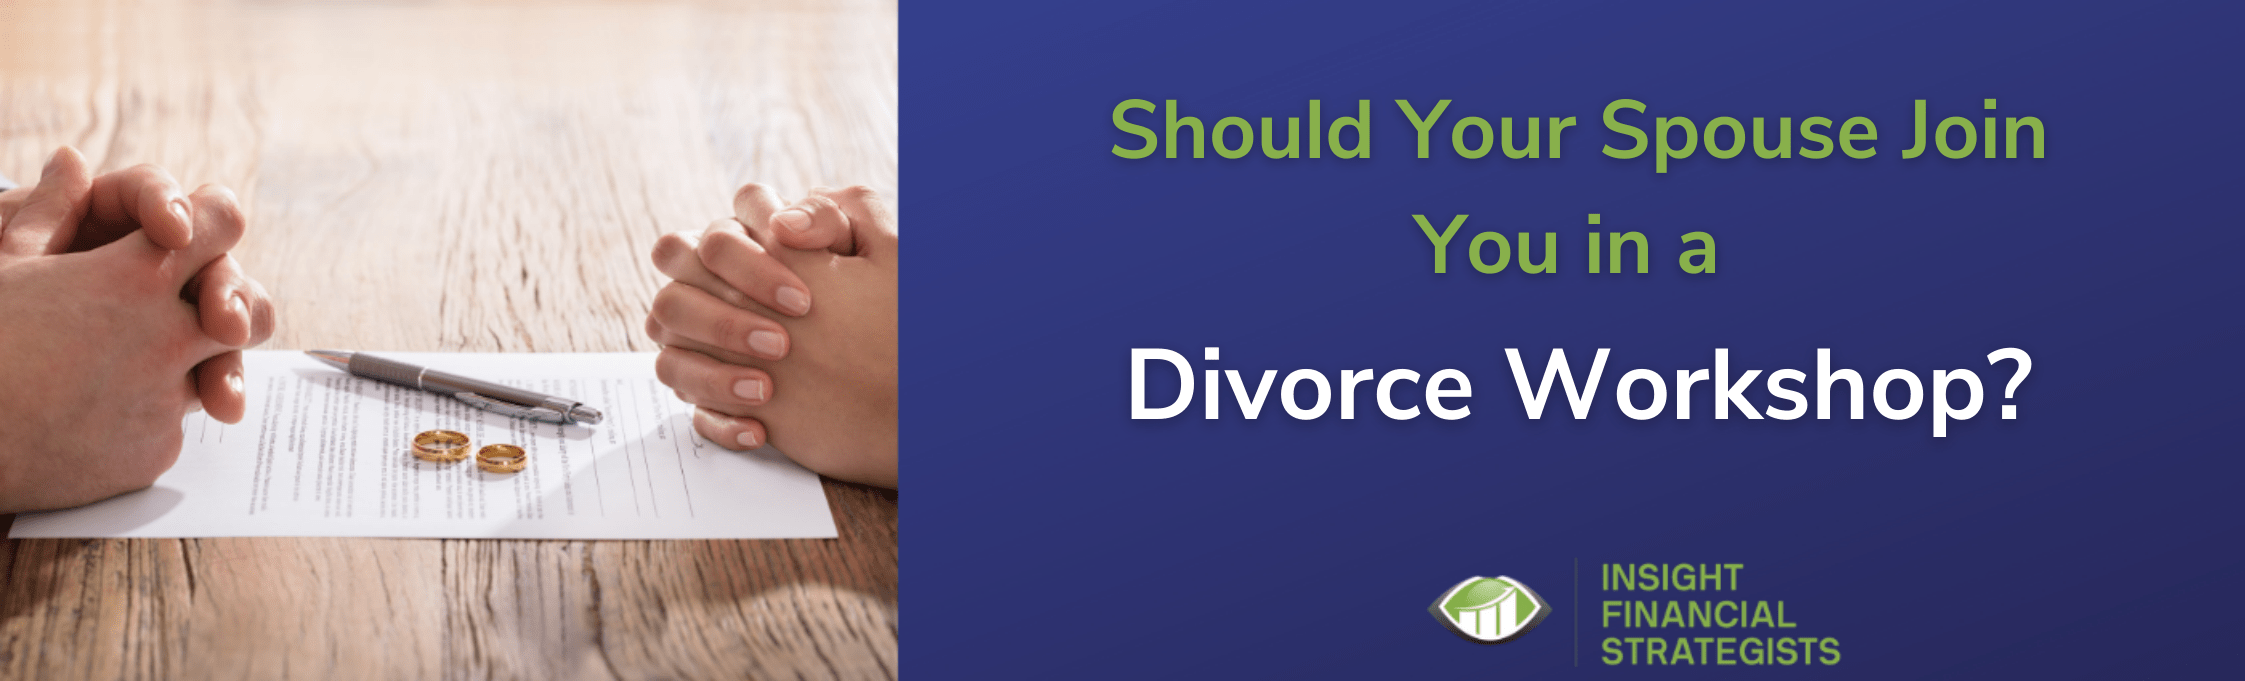 Should Your Spouse Join You in a Divorce Workshop?